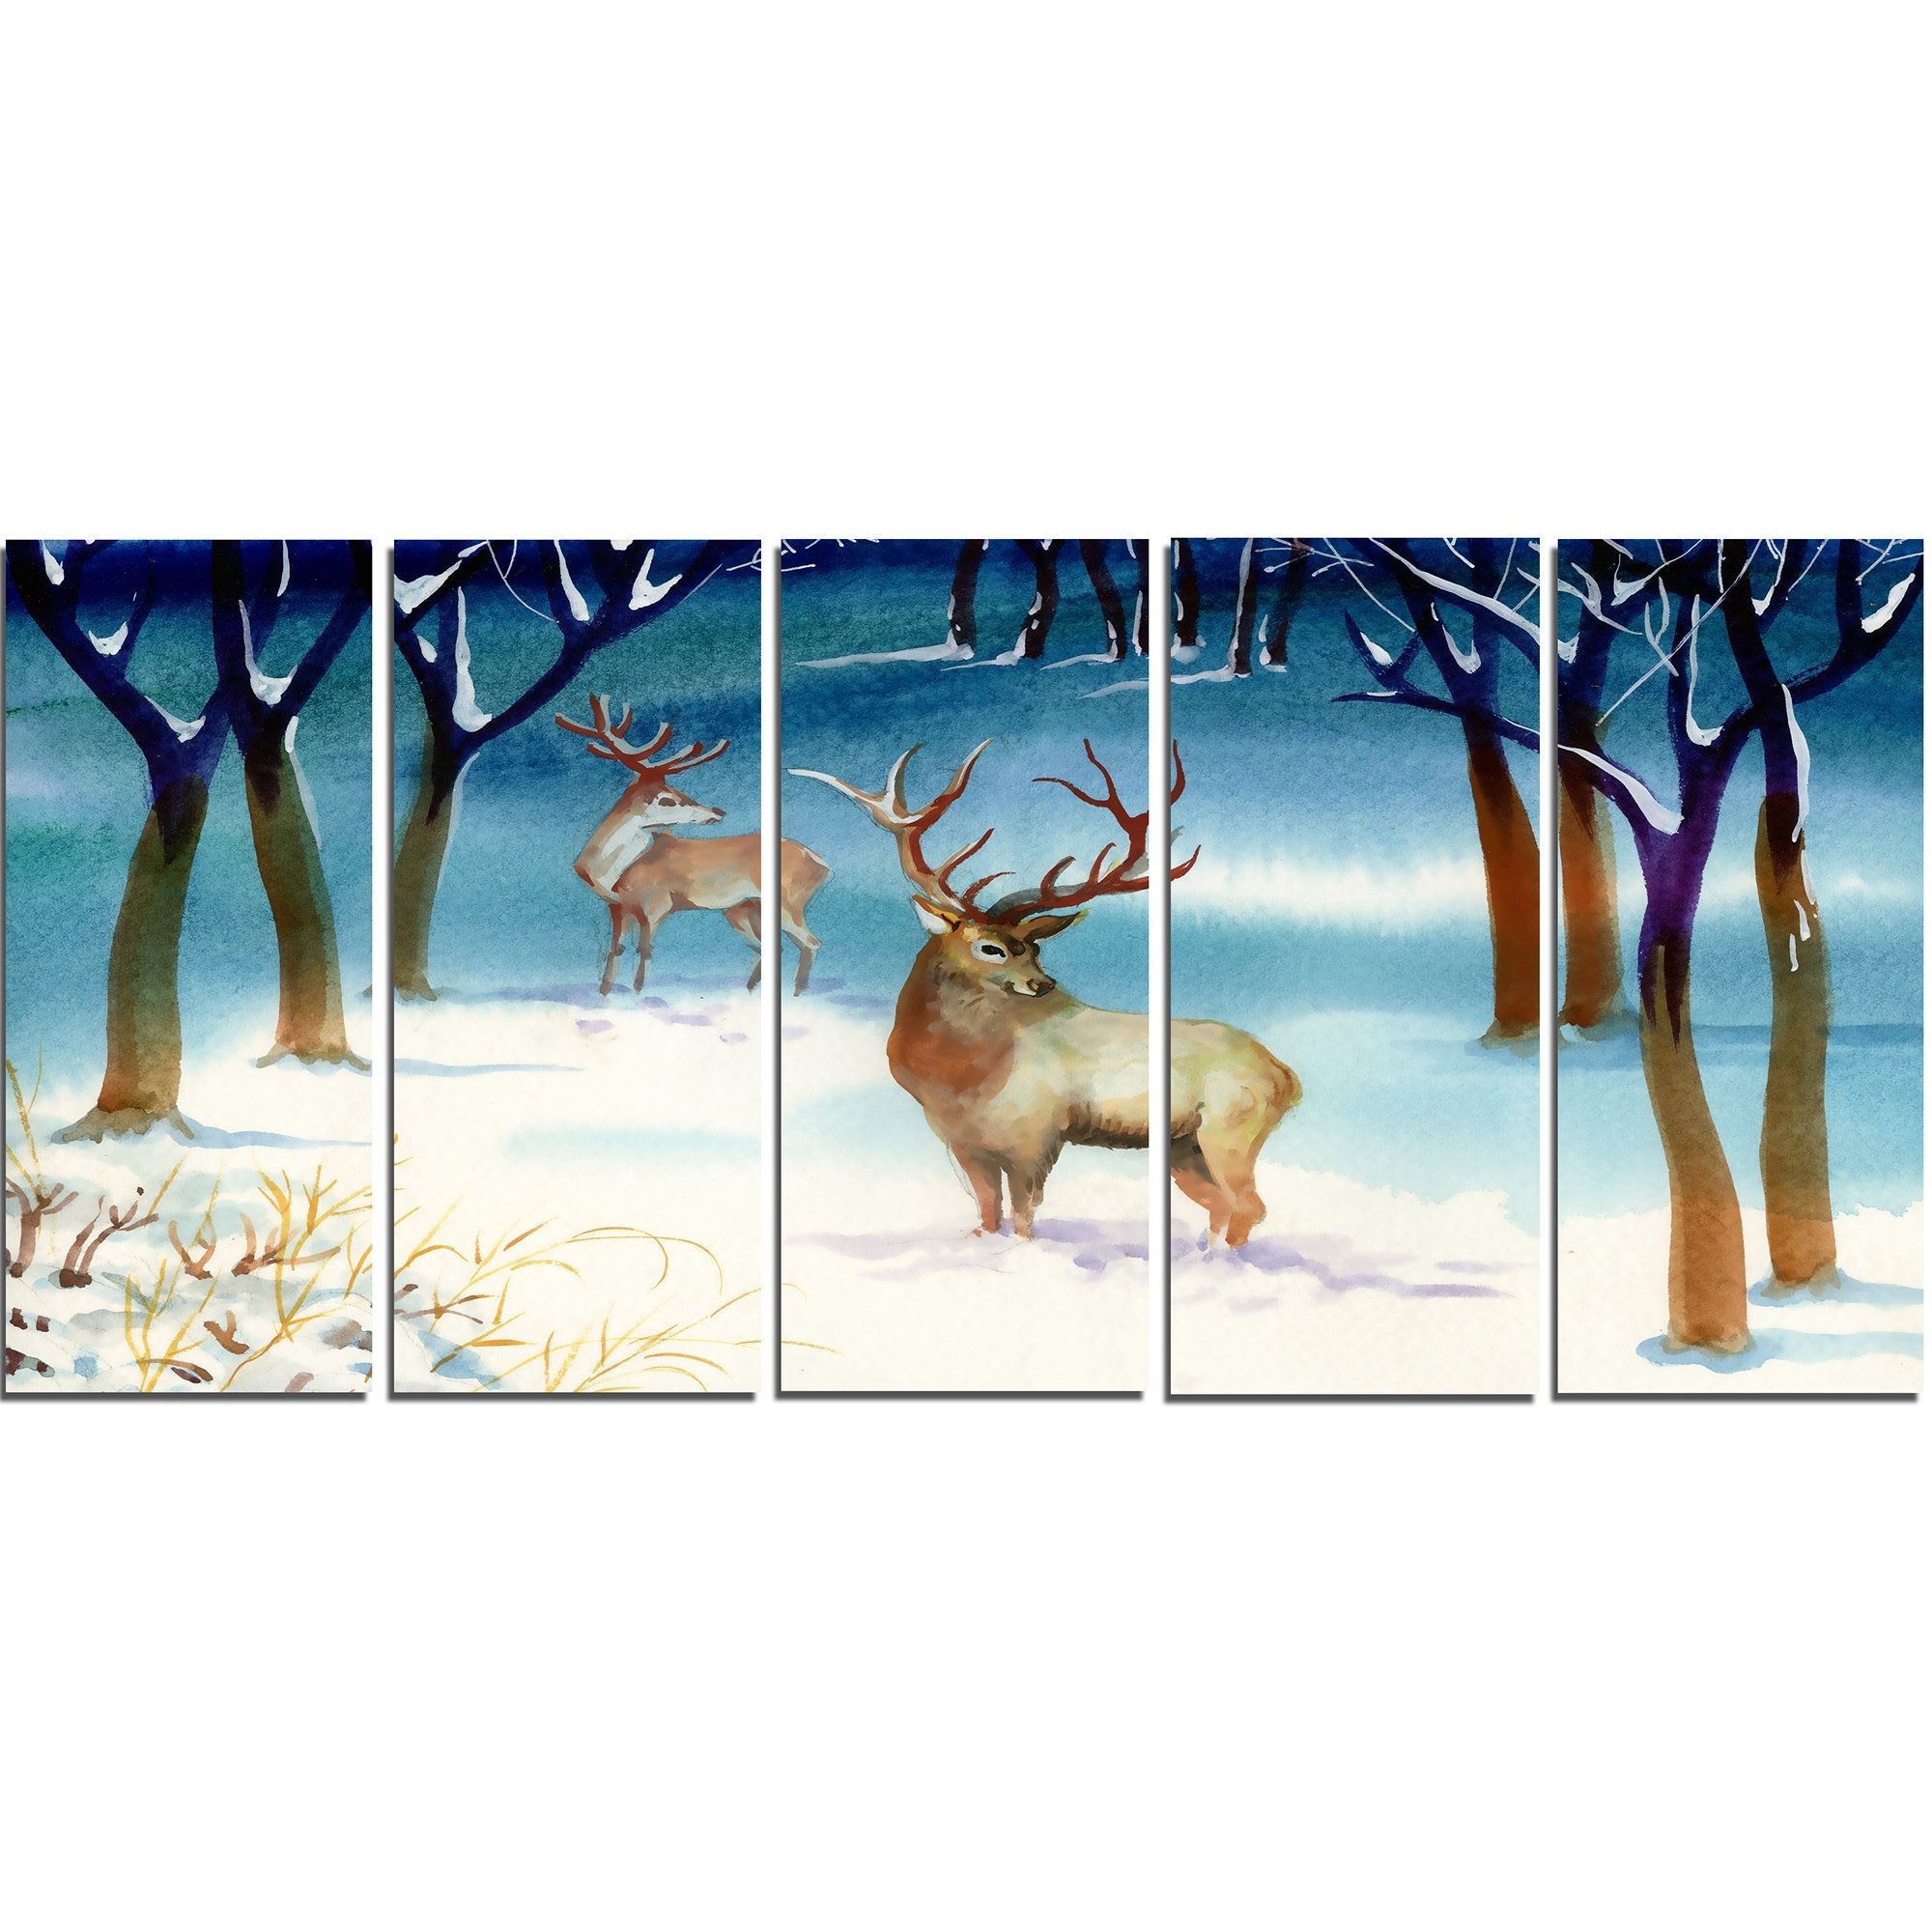 Designart Amazing Winter Forest With Deer 5 Piece Wall Art On With Deer Canvas Wall Art (View 20 of 20)